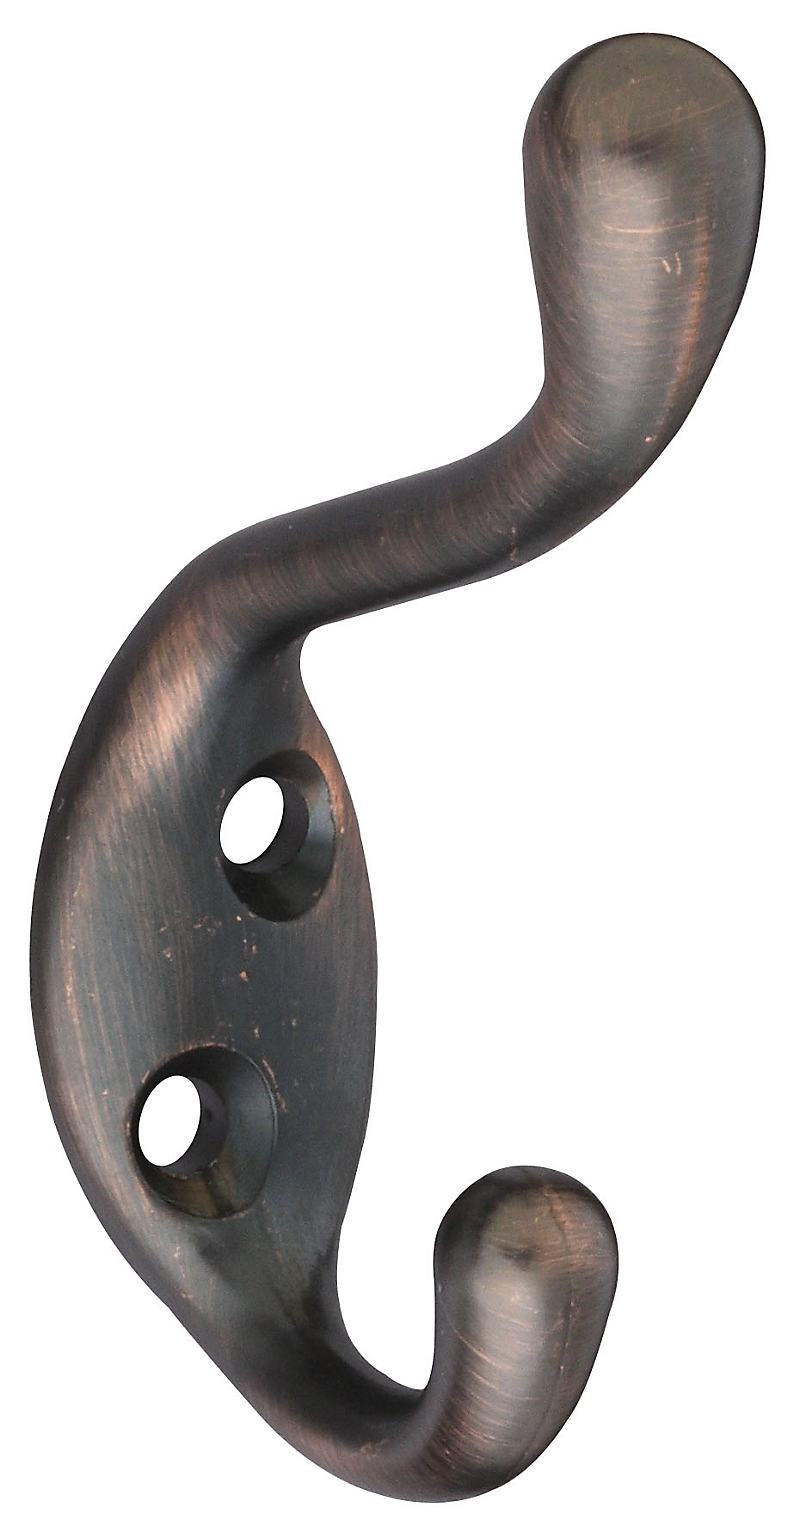 Primary Product Image for Heavy Duty Coat/Hat Hook